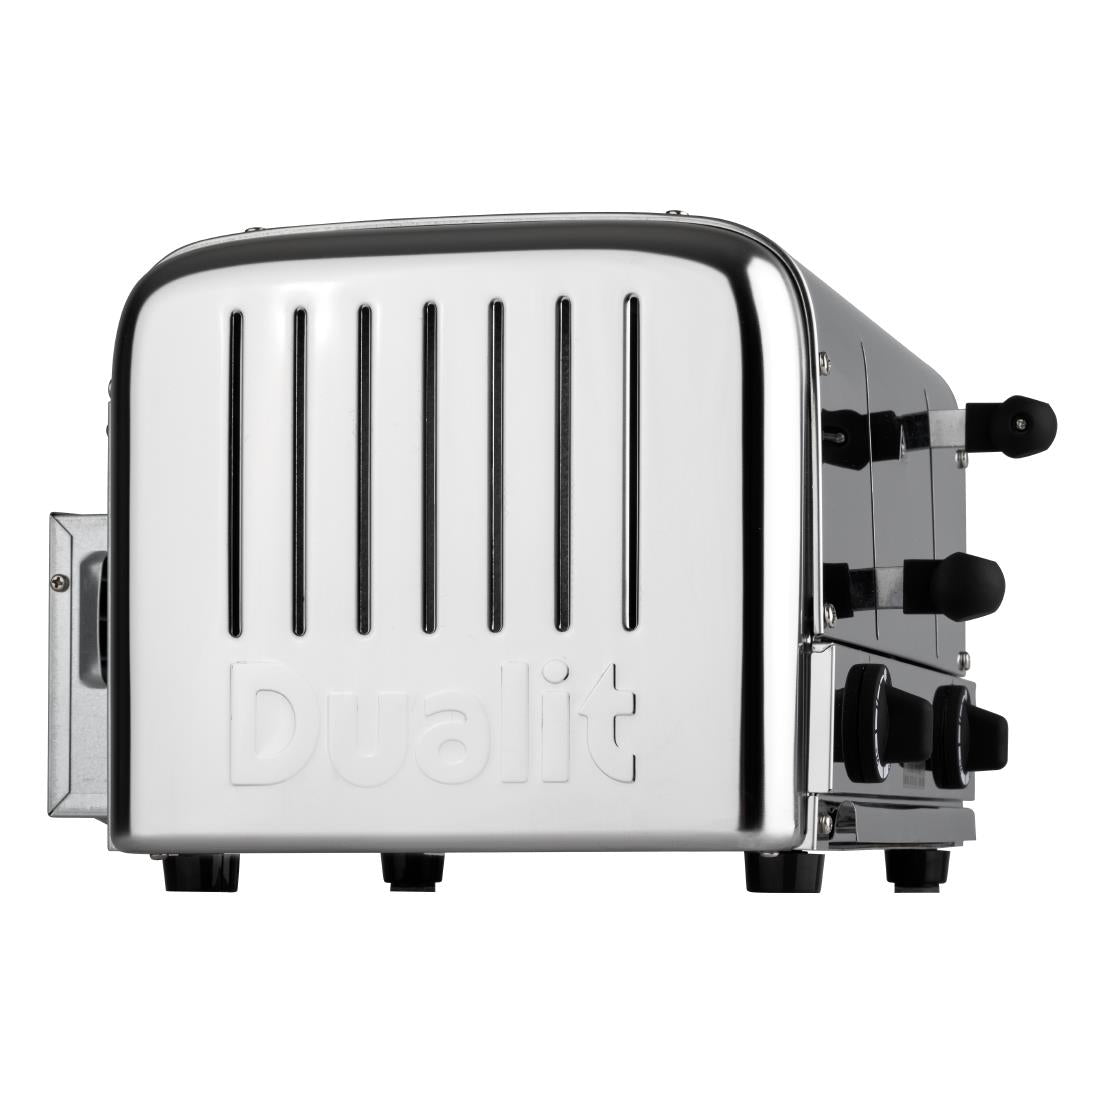 DK840 Dualit Catering 4 Slice Toaster 49900 JD Catering Equipment Solutions Ltd